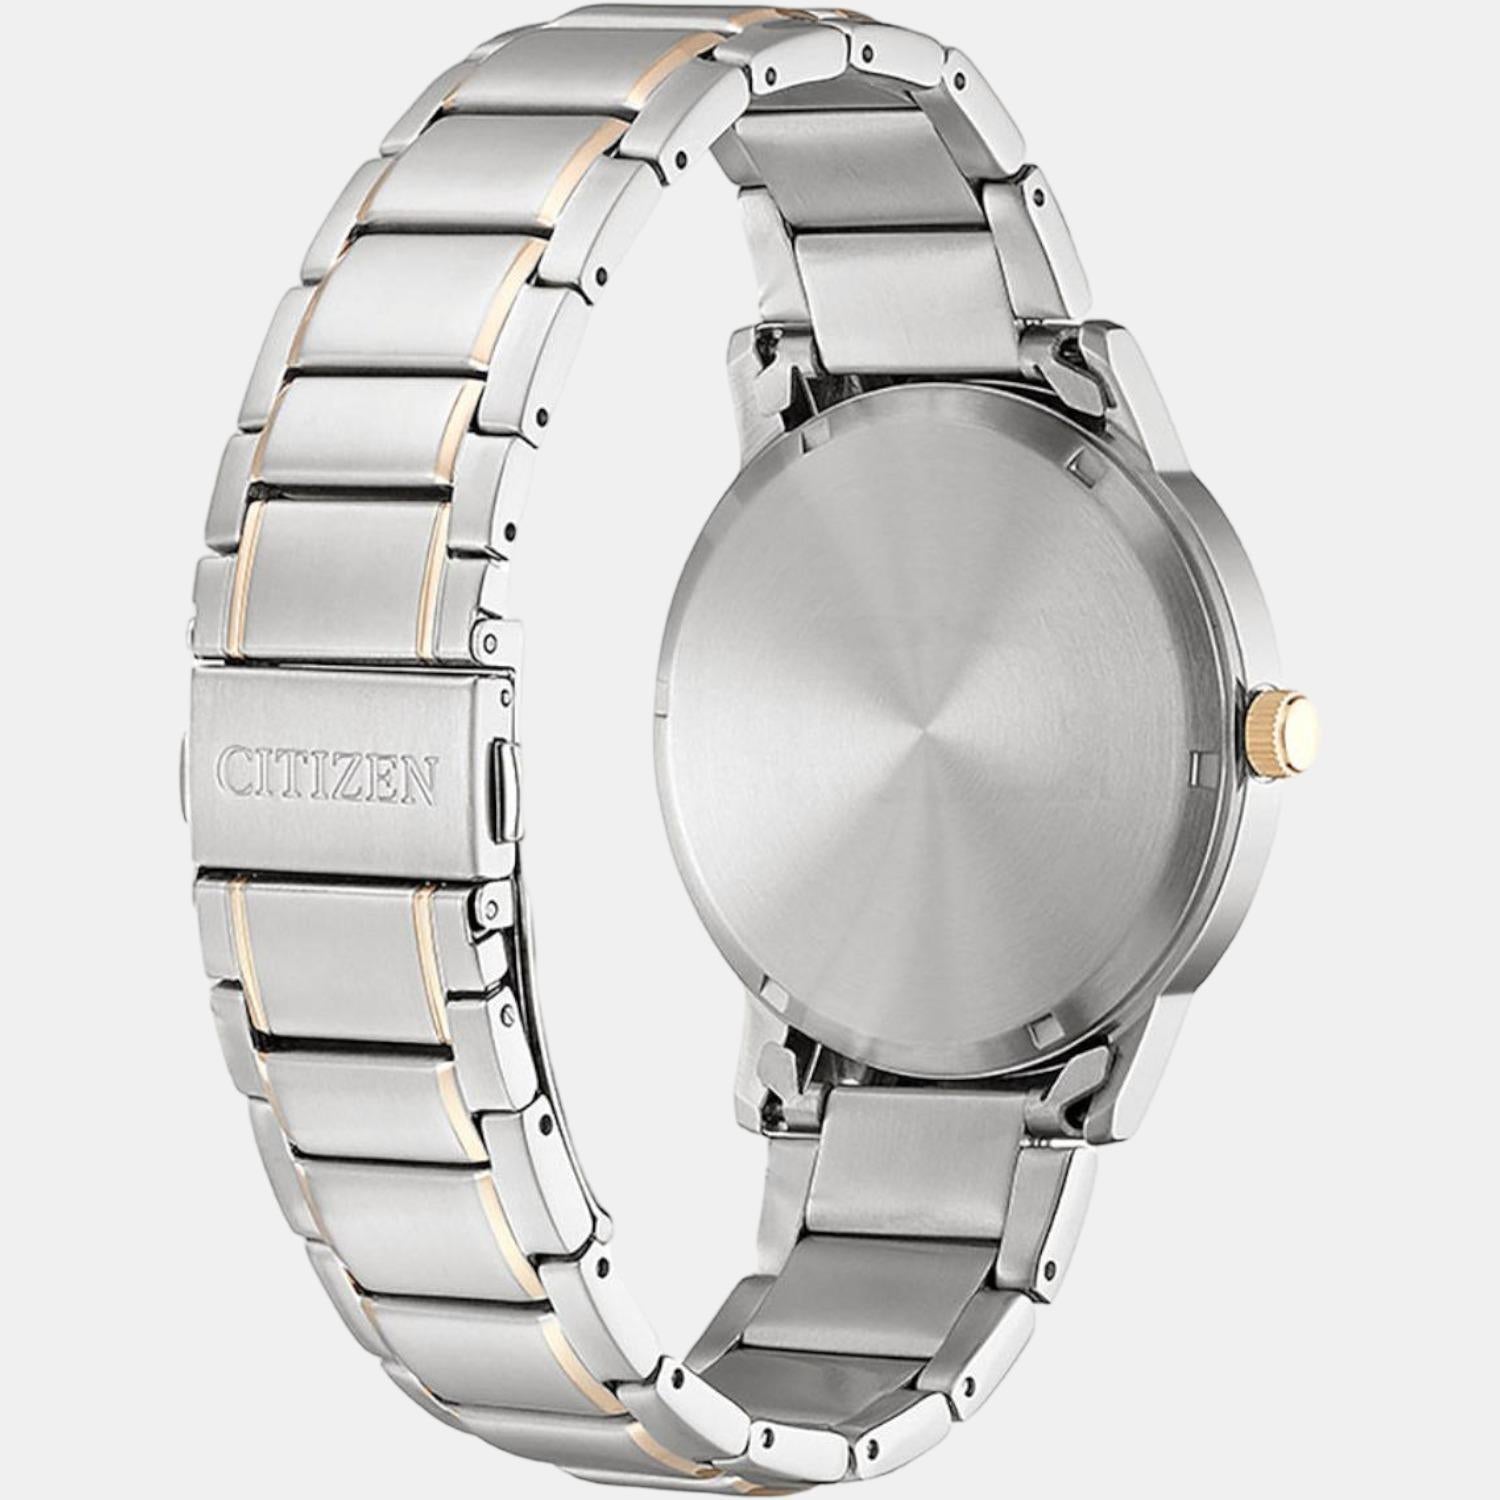 citizen-stainless-steel-white-analog-men-watch-aw1676-86a